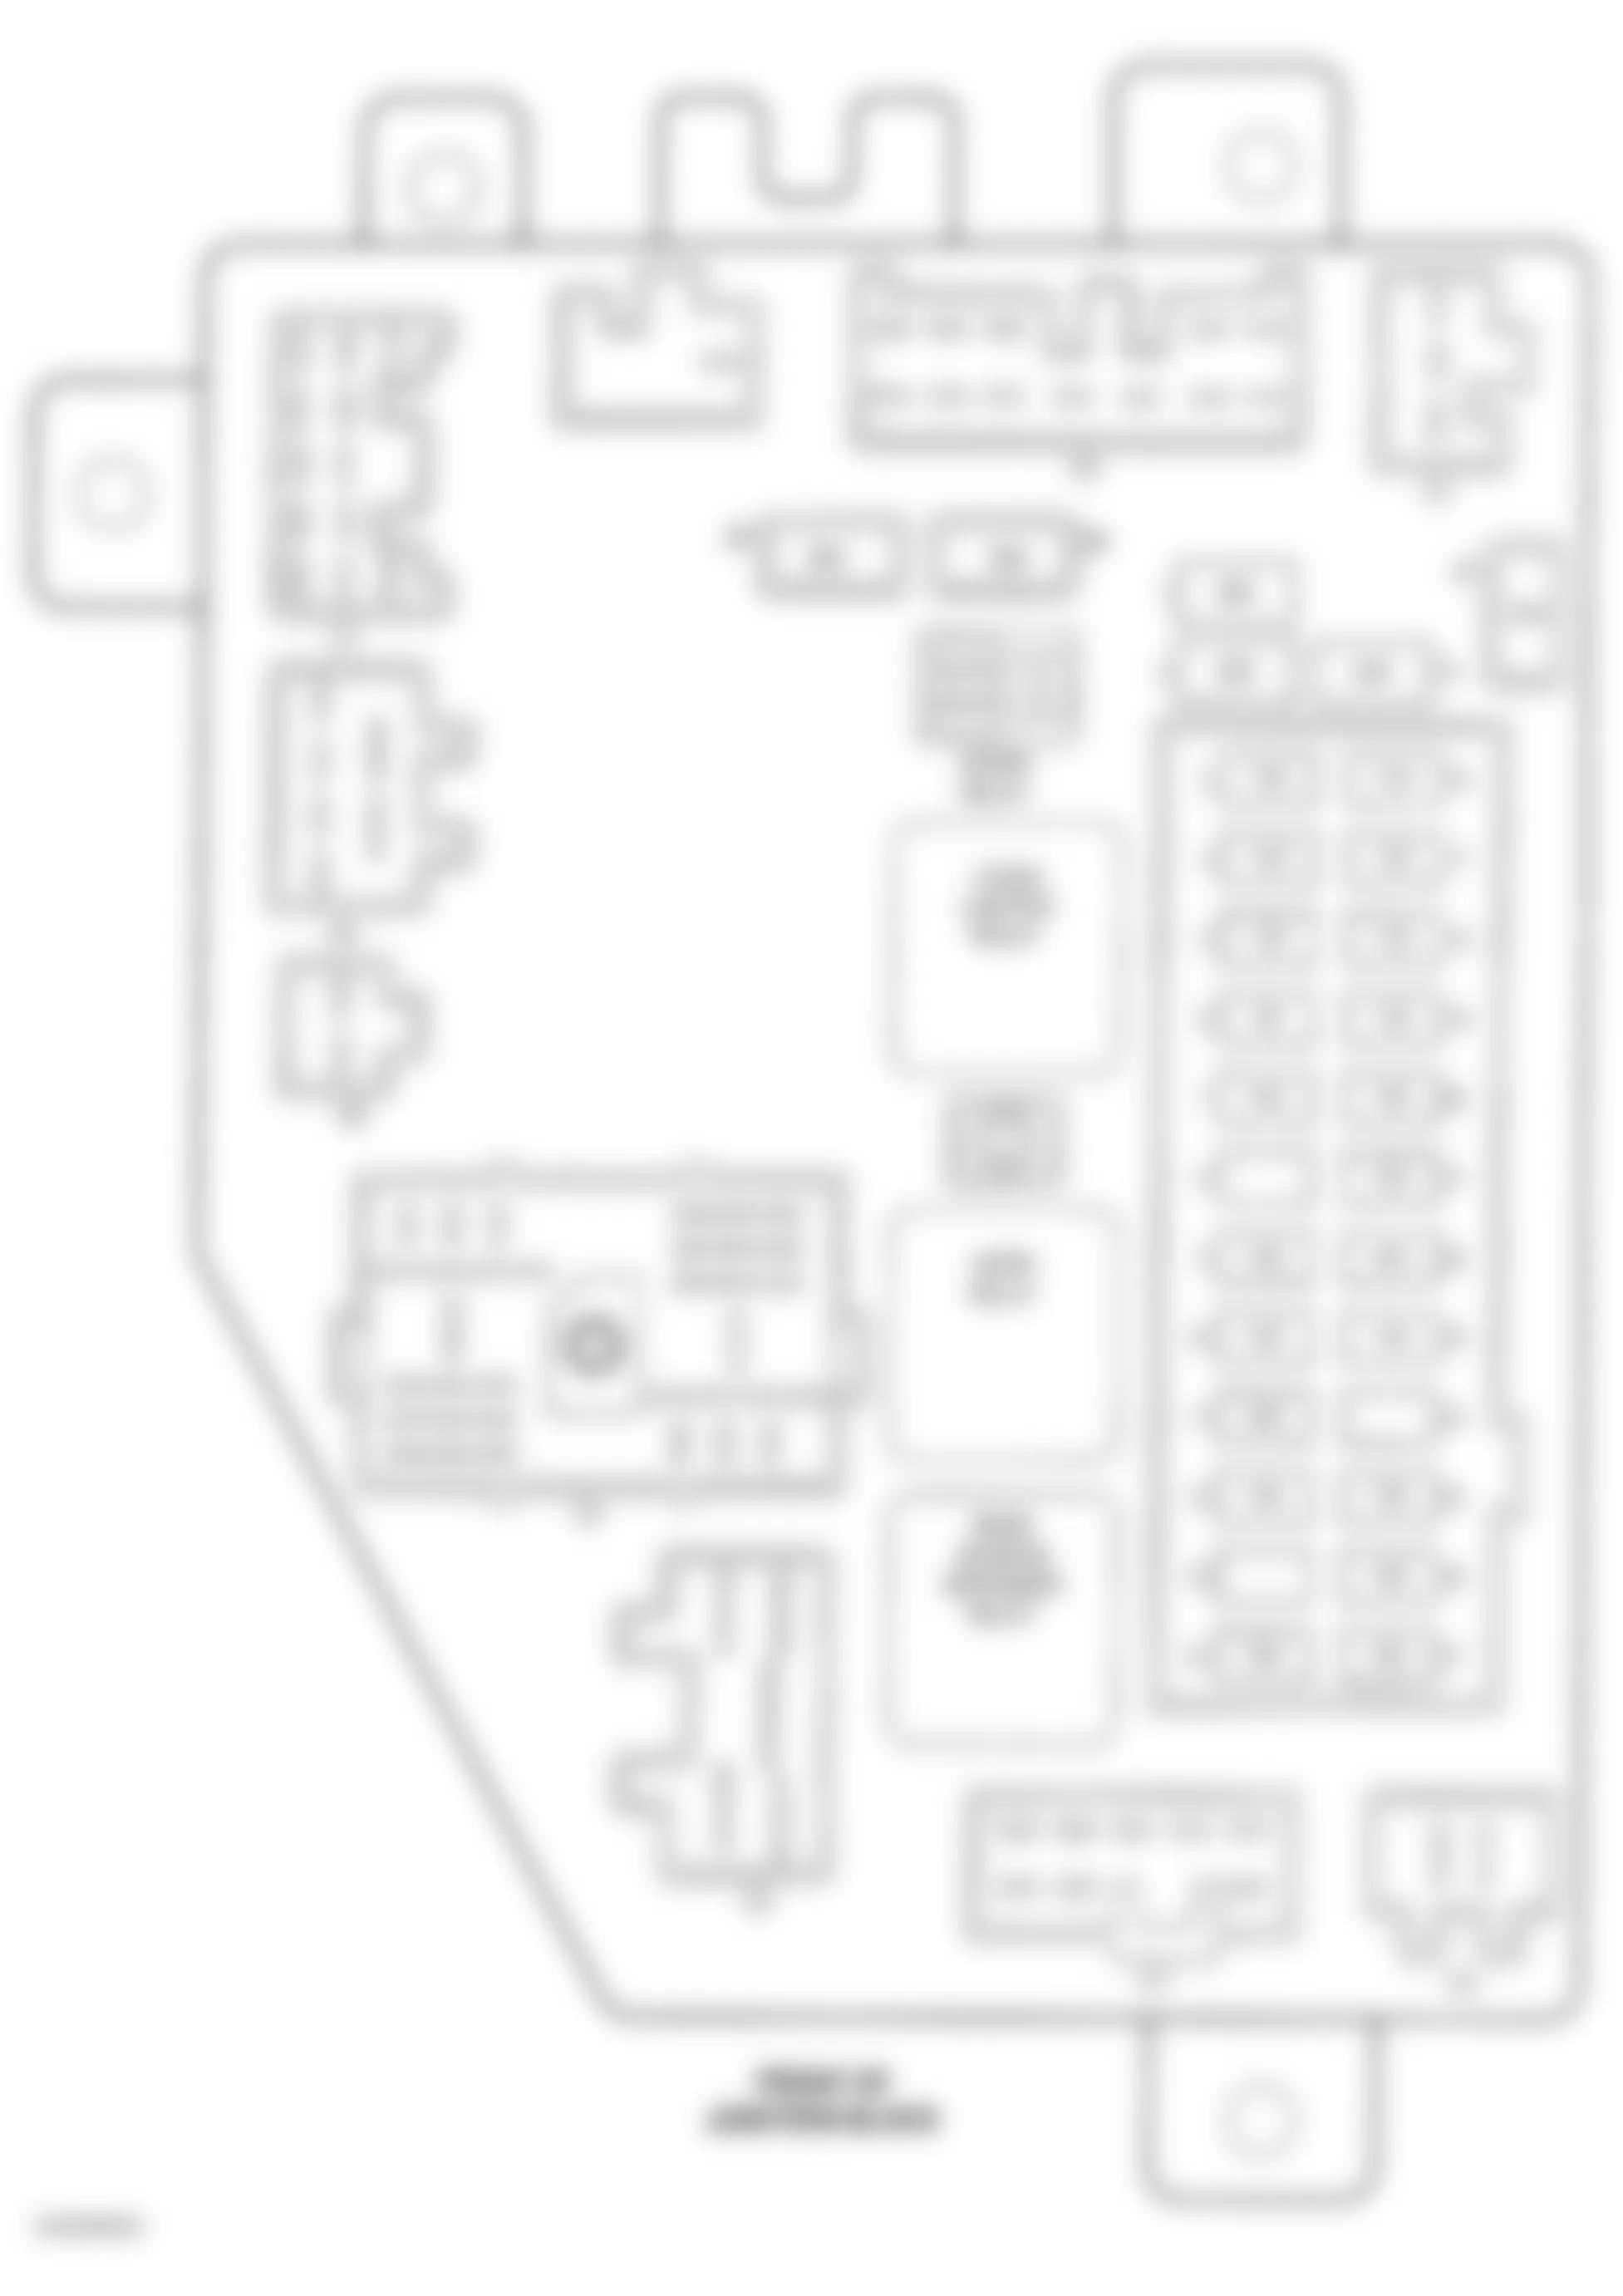 Jeep Cherokee Limited 1999 - Component Locations -  Identifying Junction Block Components